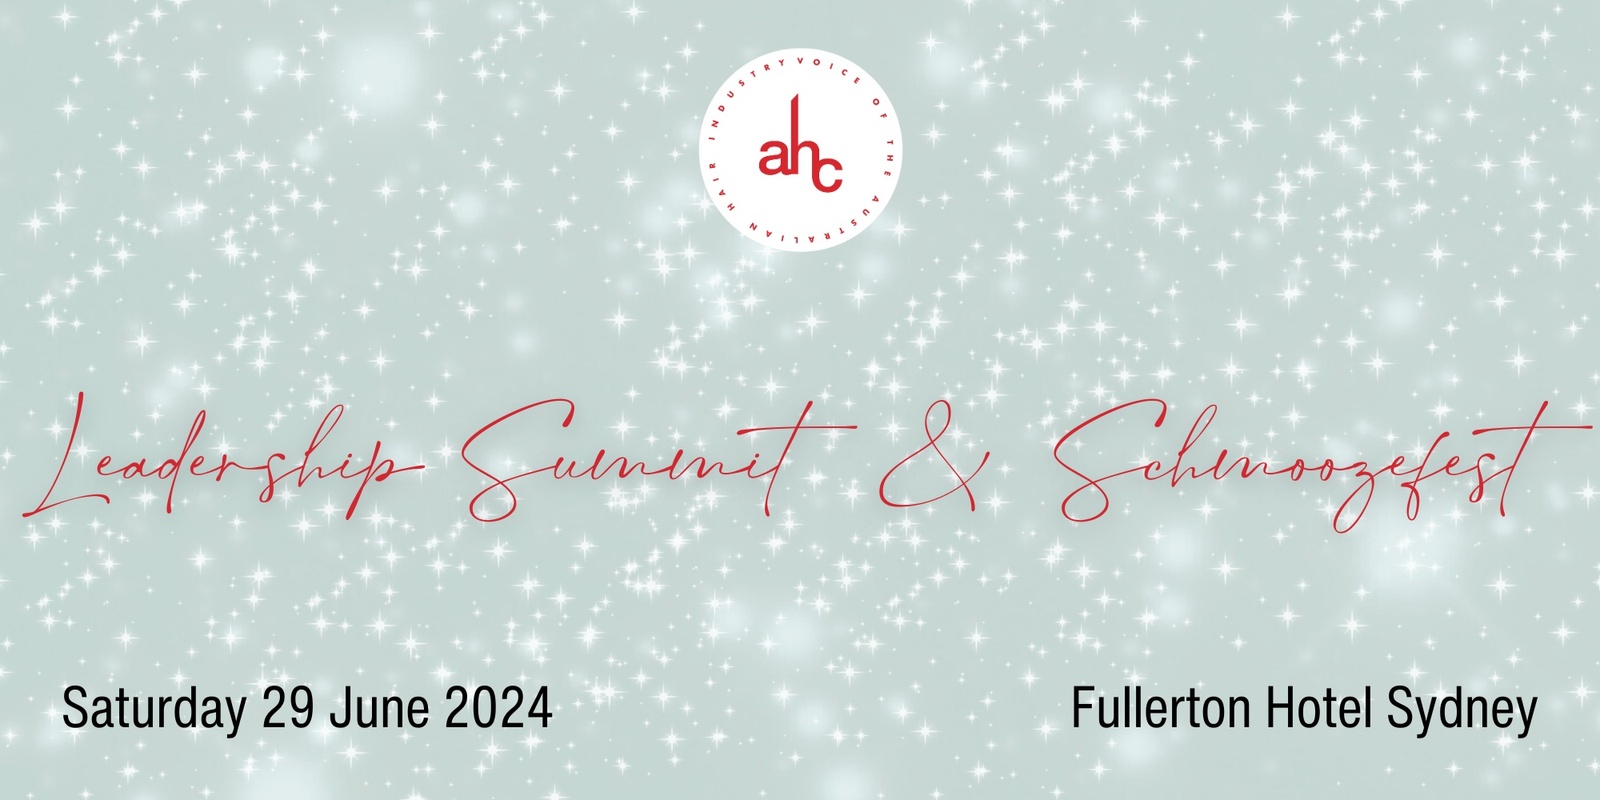 Banner image for AHC Leadership Summit & Schmoozefest 2024